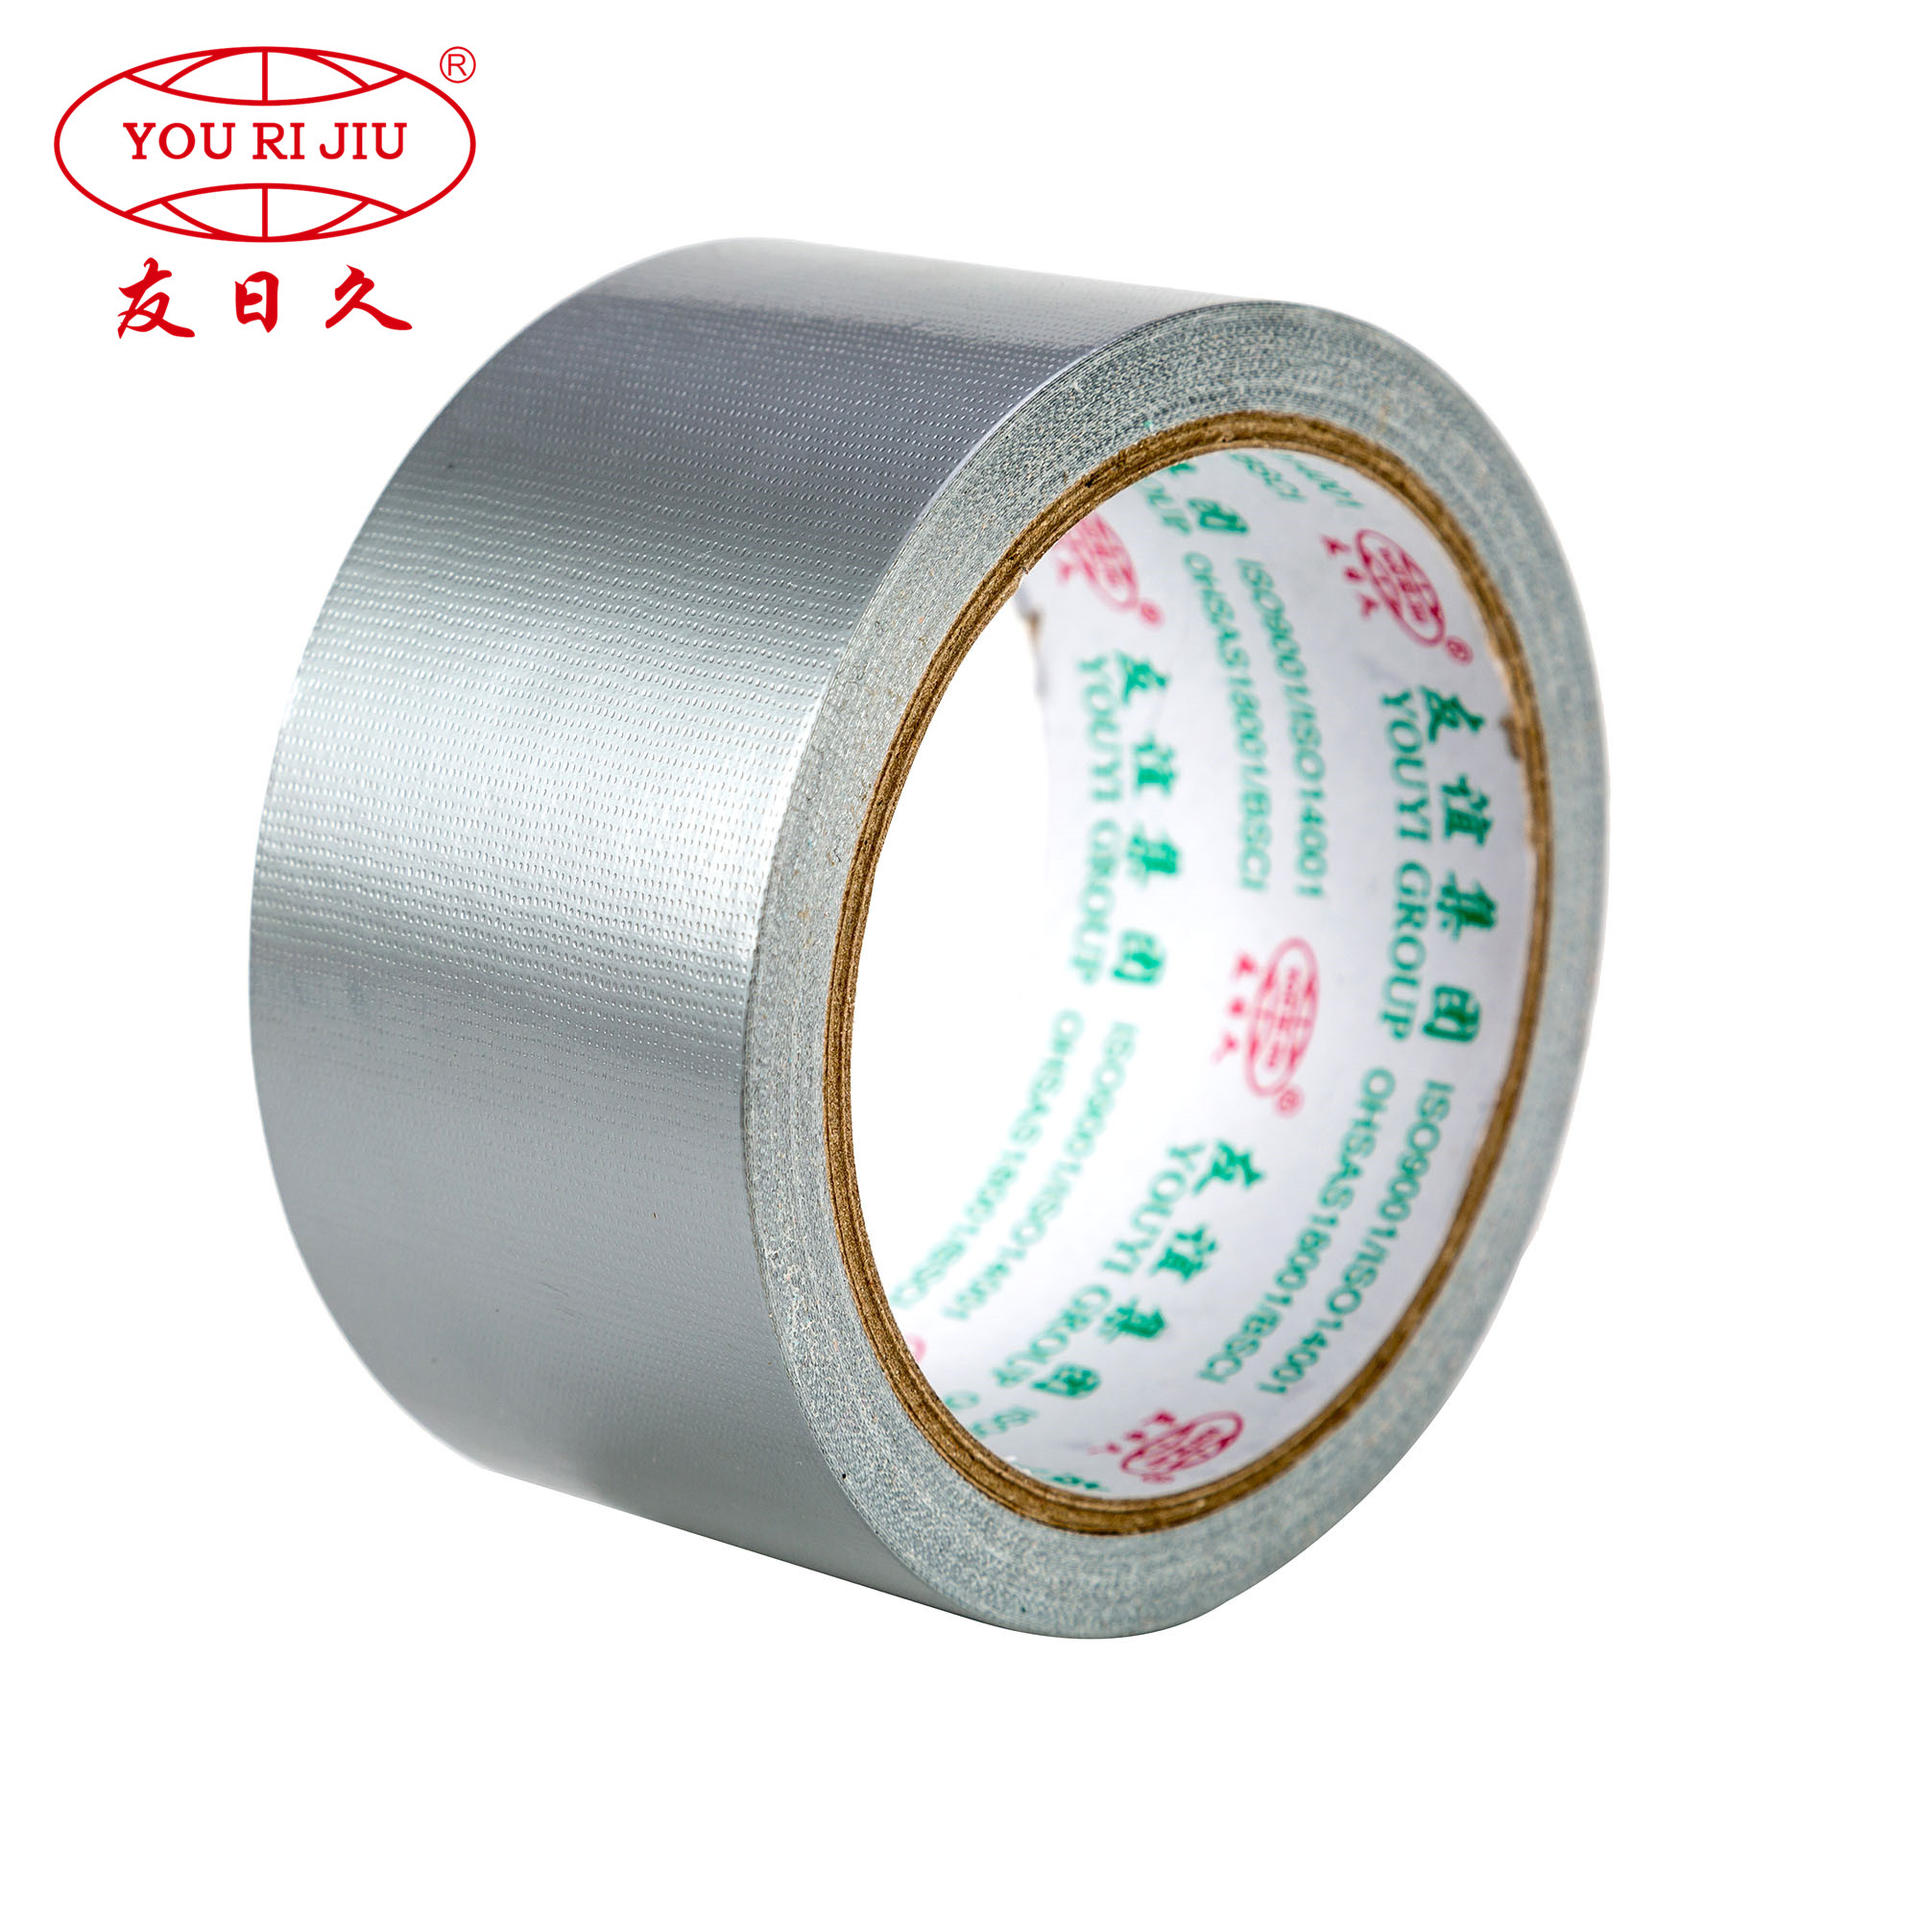 Custom printed brand sealing and packing protective cloth duct tape